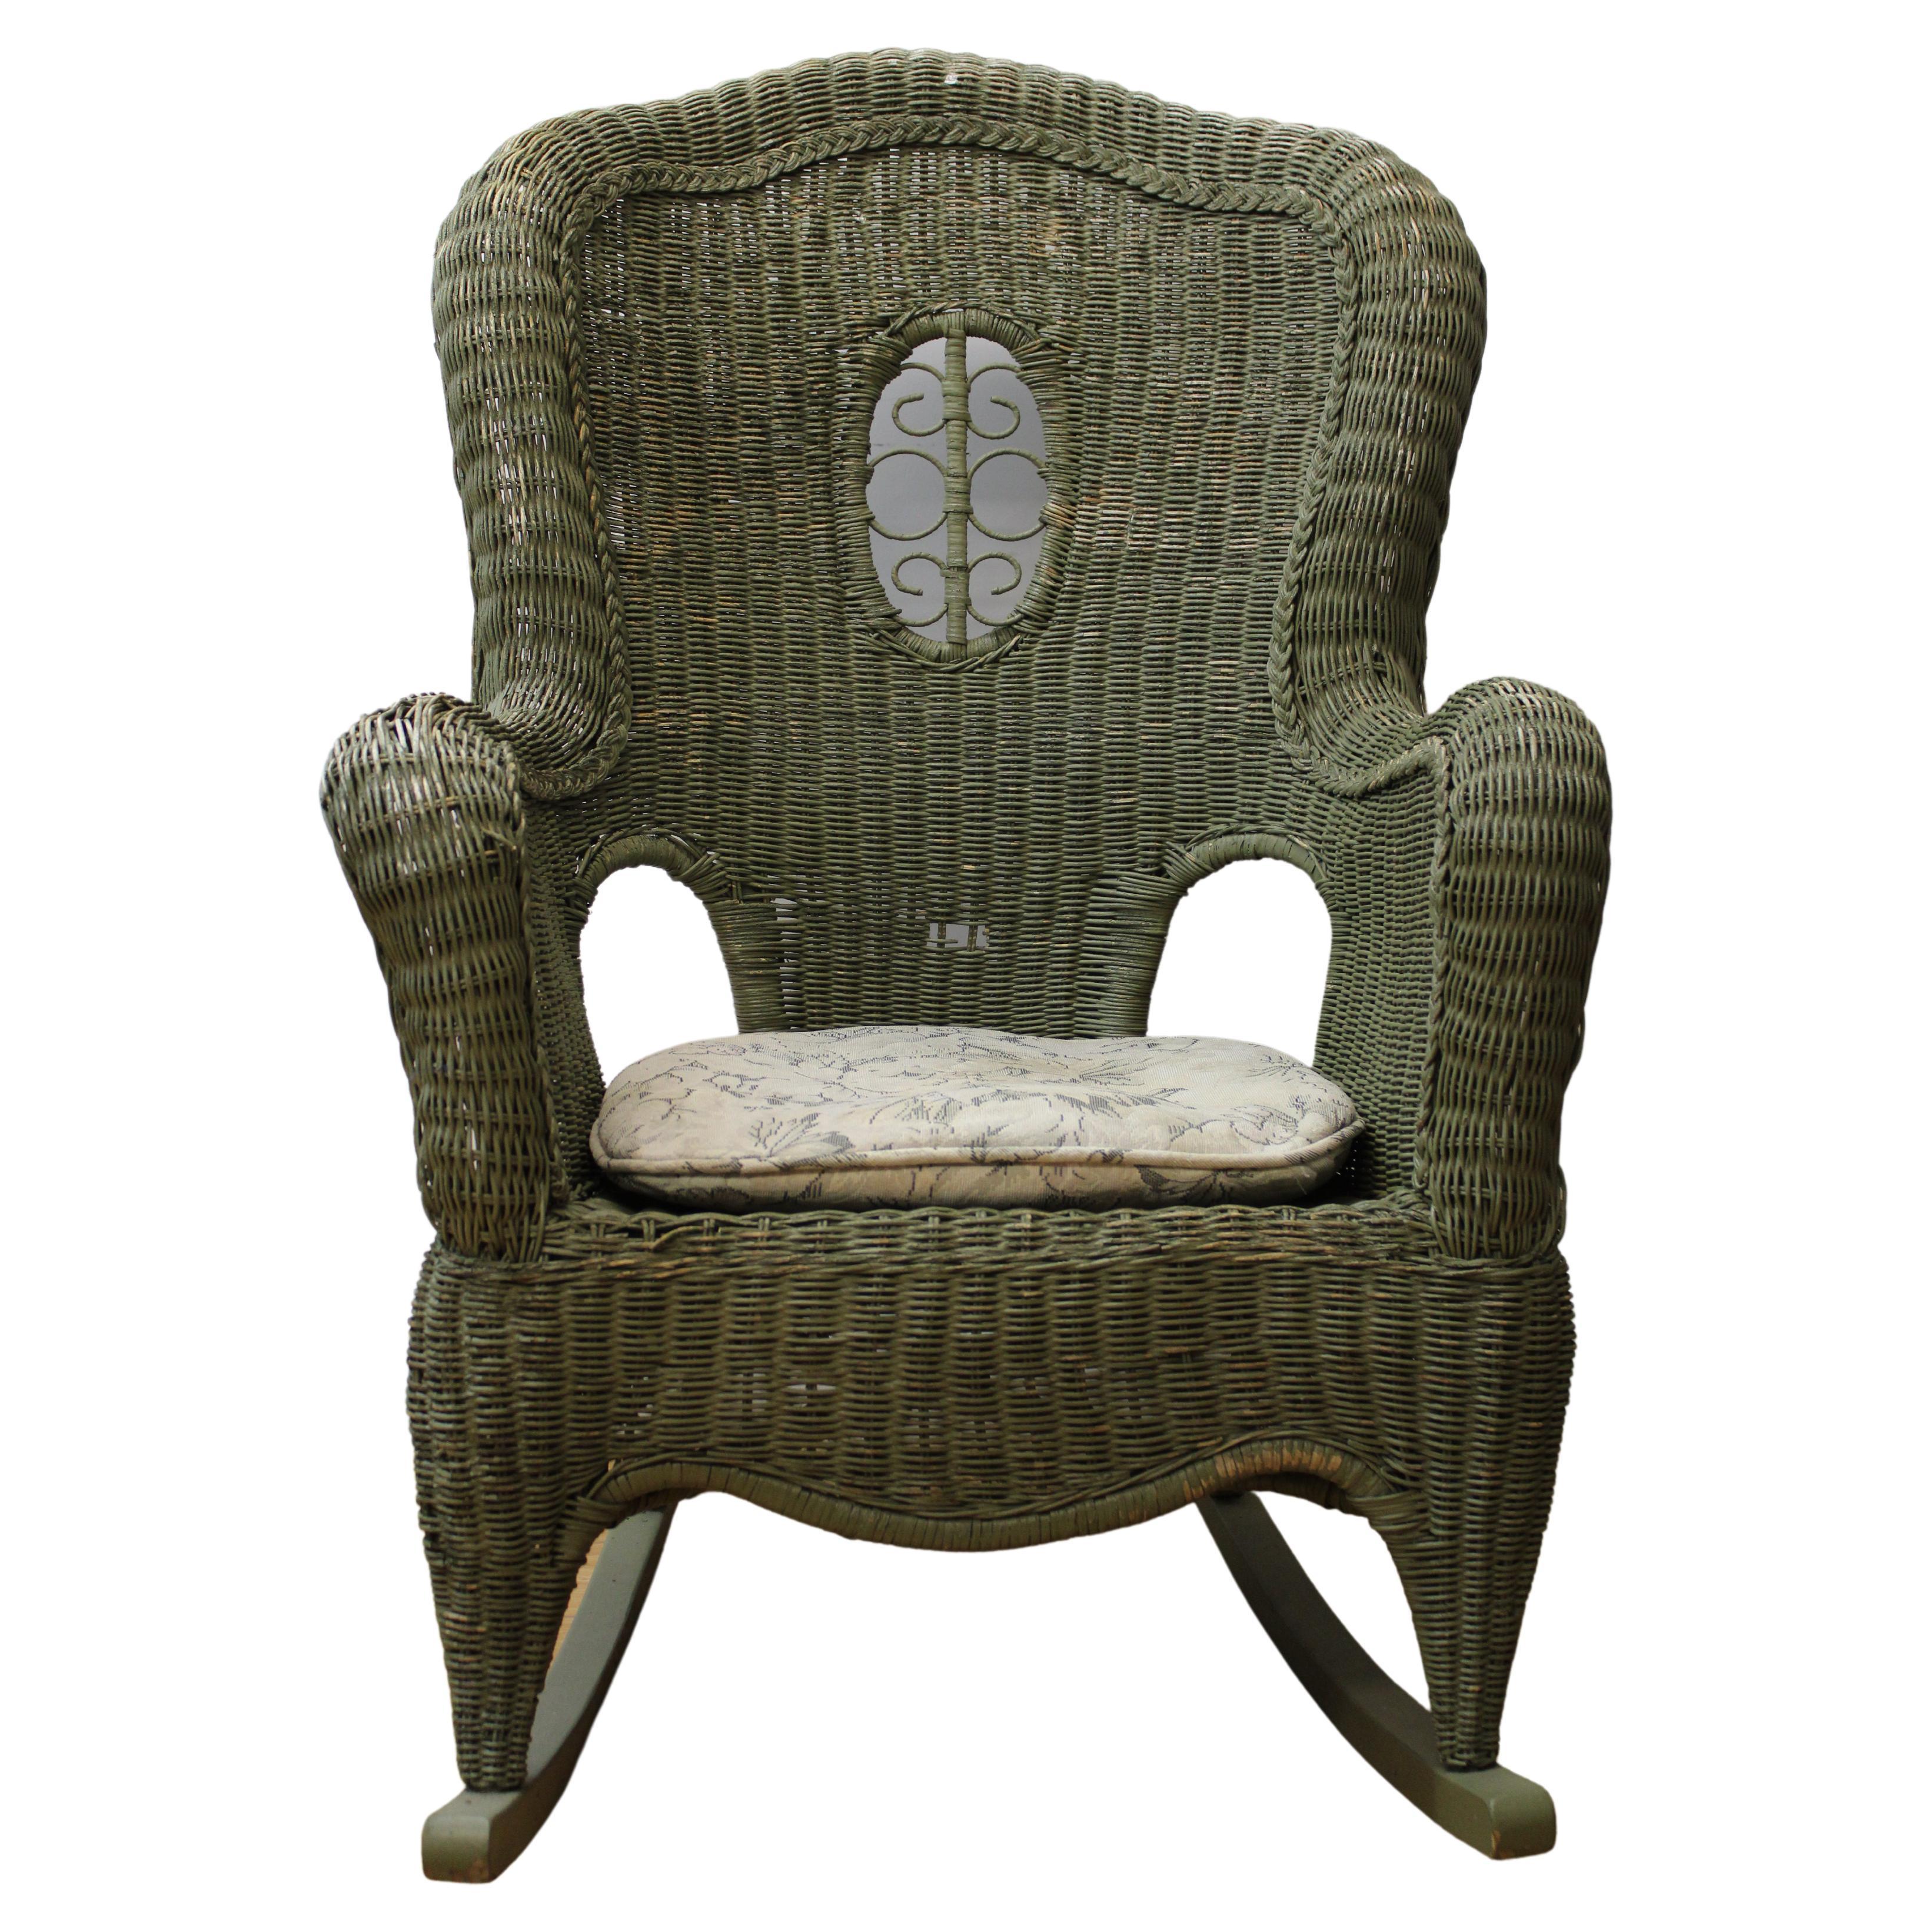 Victorian Wicker Rocking Chair For Sale